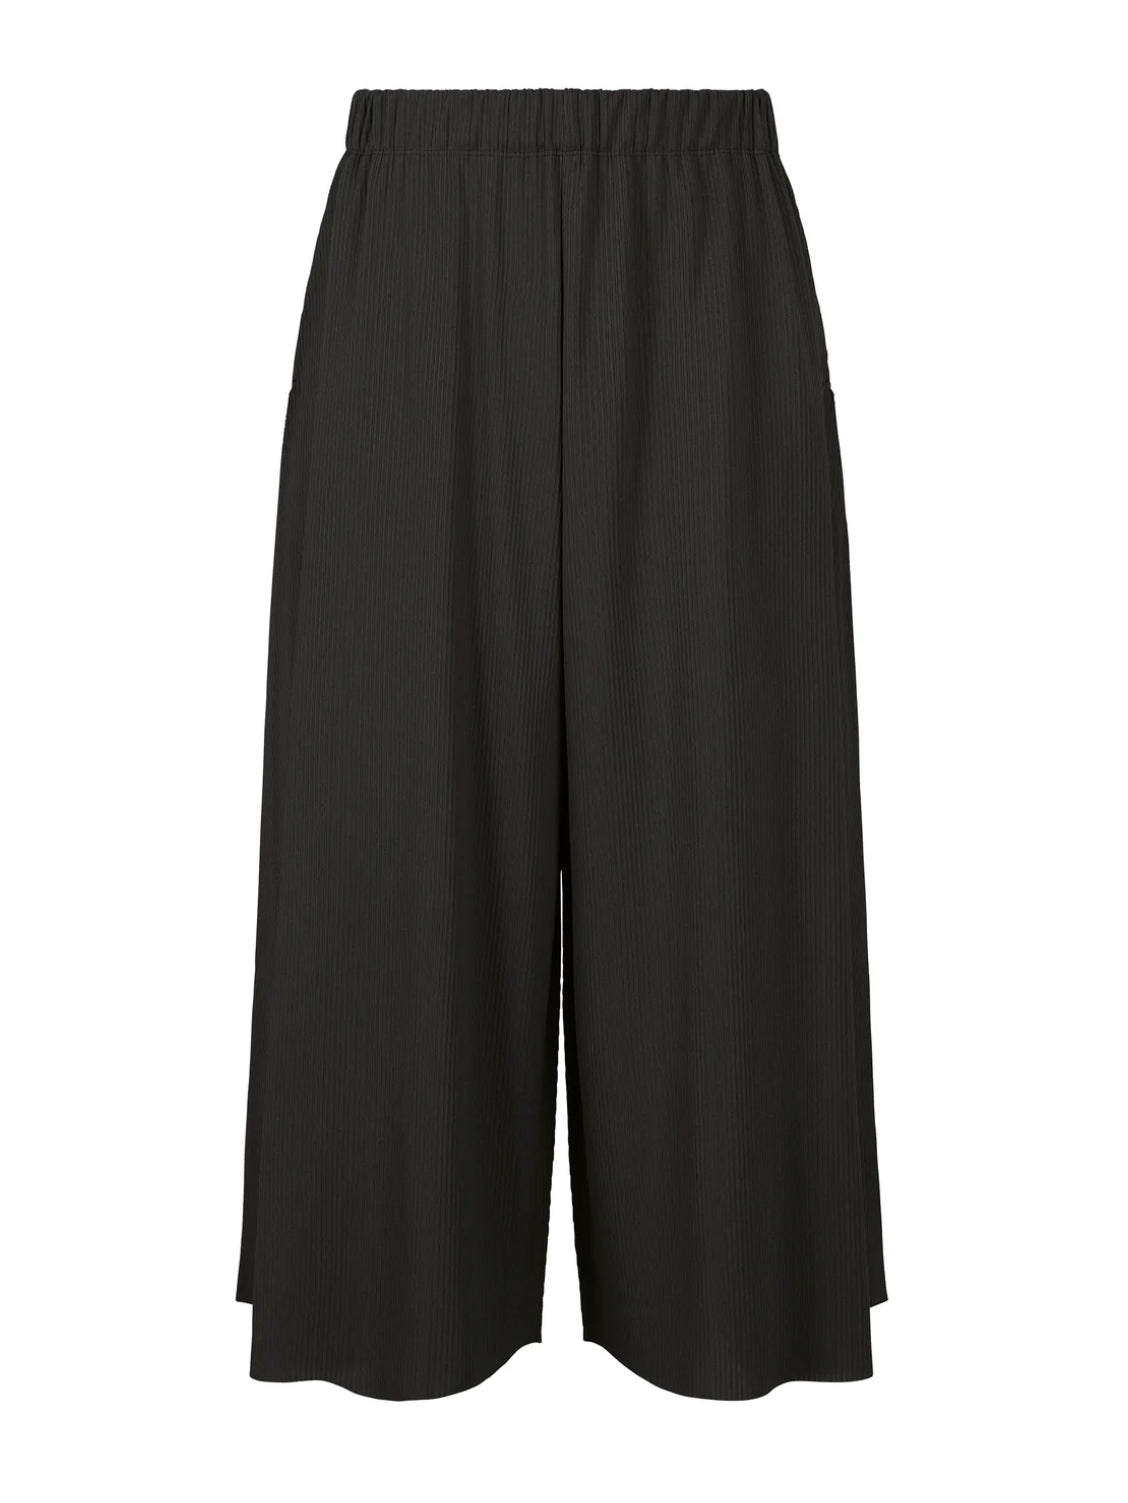 Flared cropped trousers, black